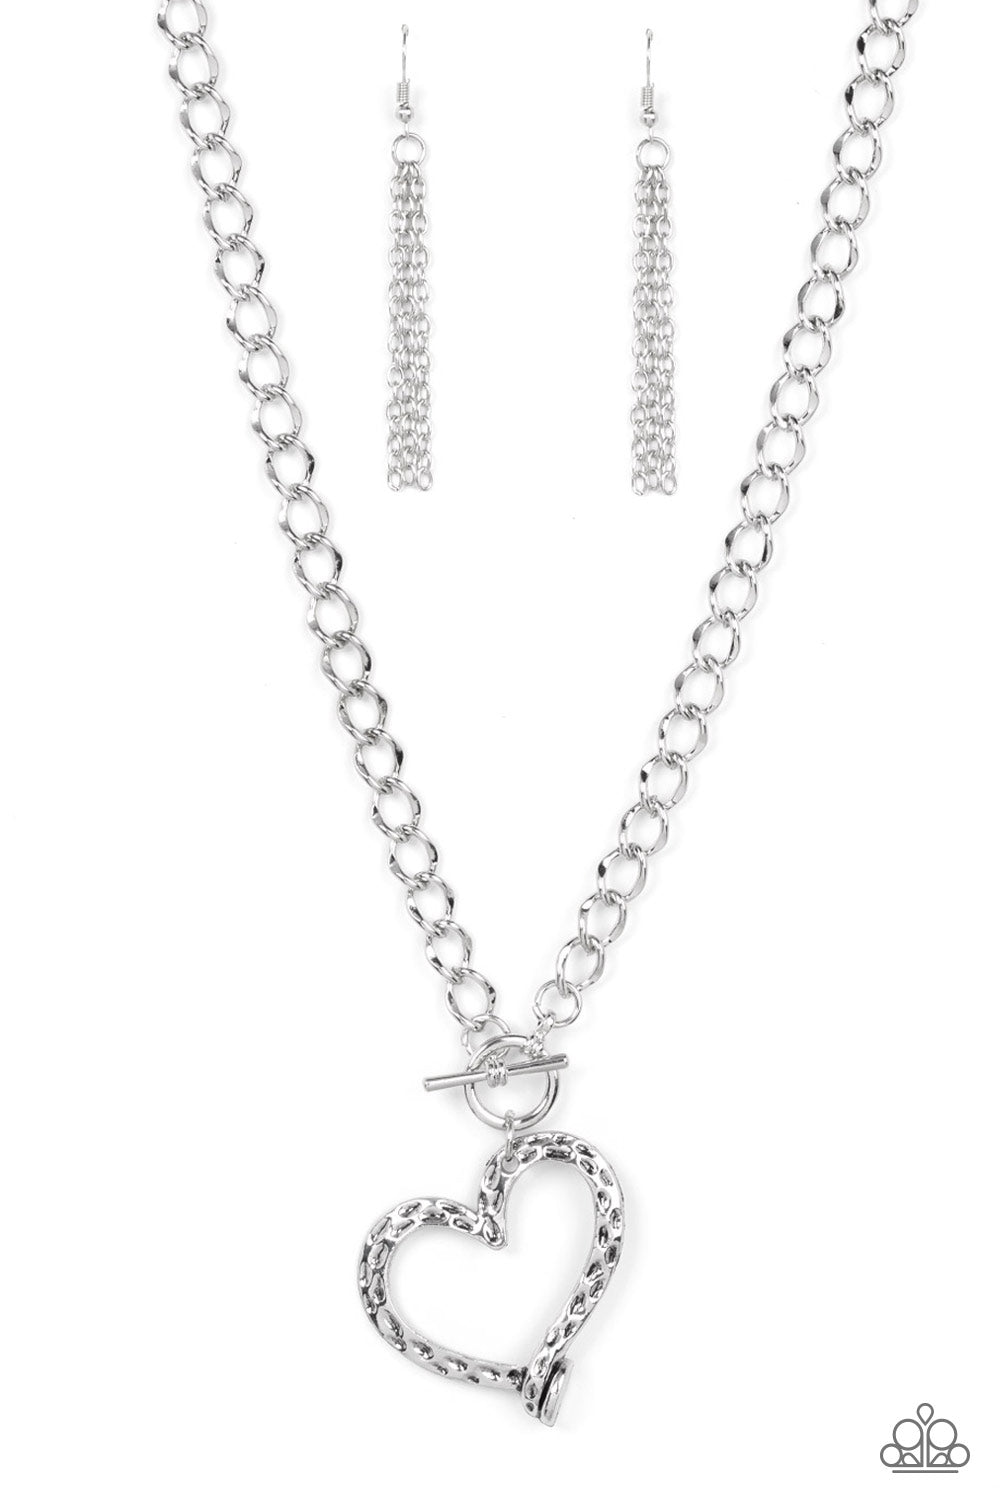 Reimagined Romance - Silver Necklace